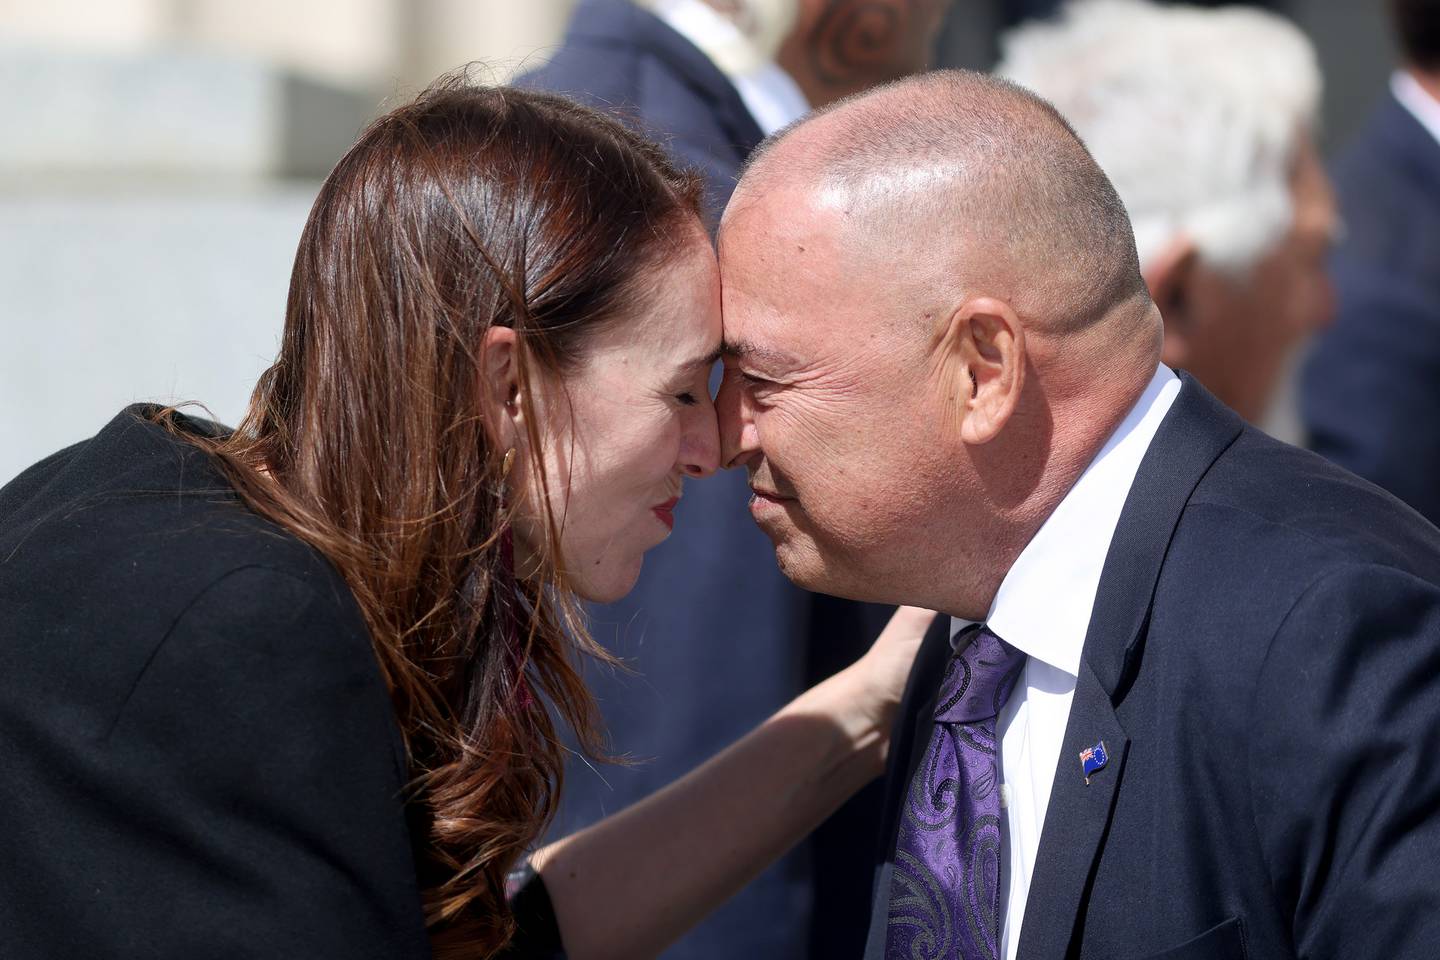 Prime Minister Jacinda Ardern and Cook Islands Prime Minister Mark Brown greet each other with a hongi during Brown's visit to NZ in March. Photo / Getty Images